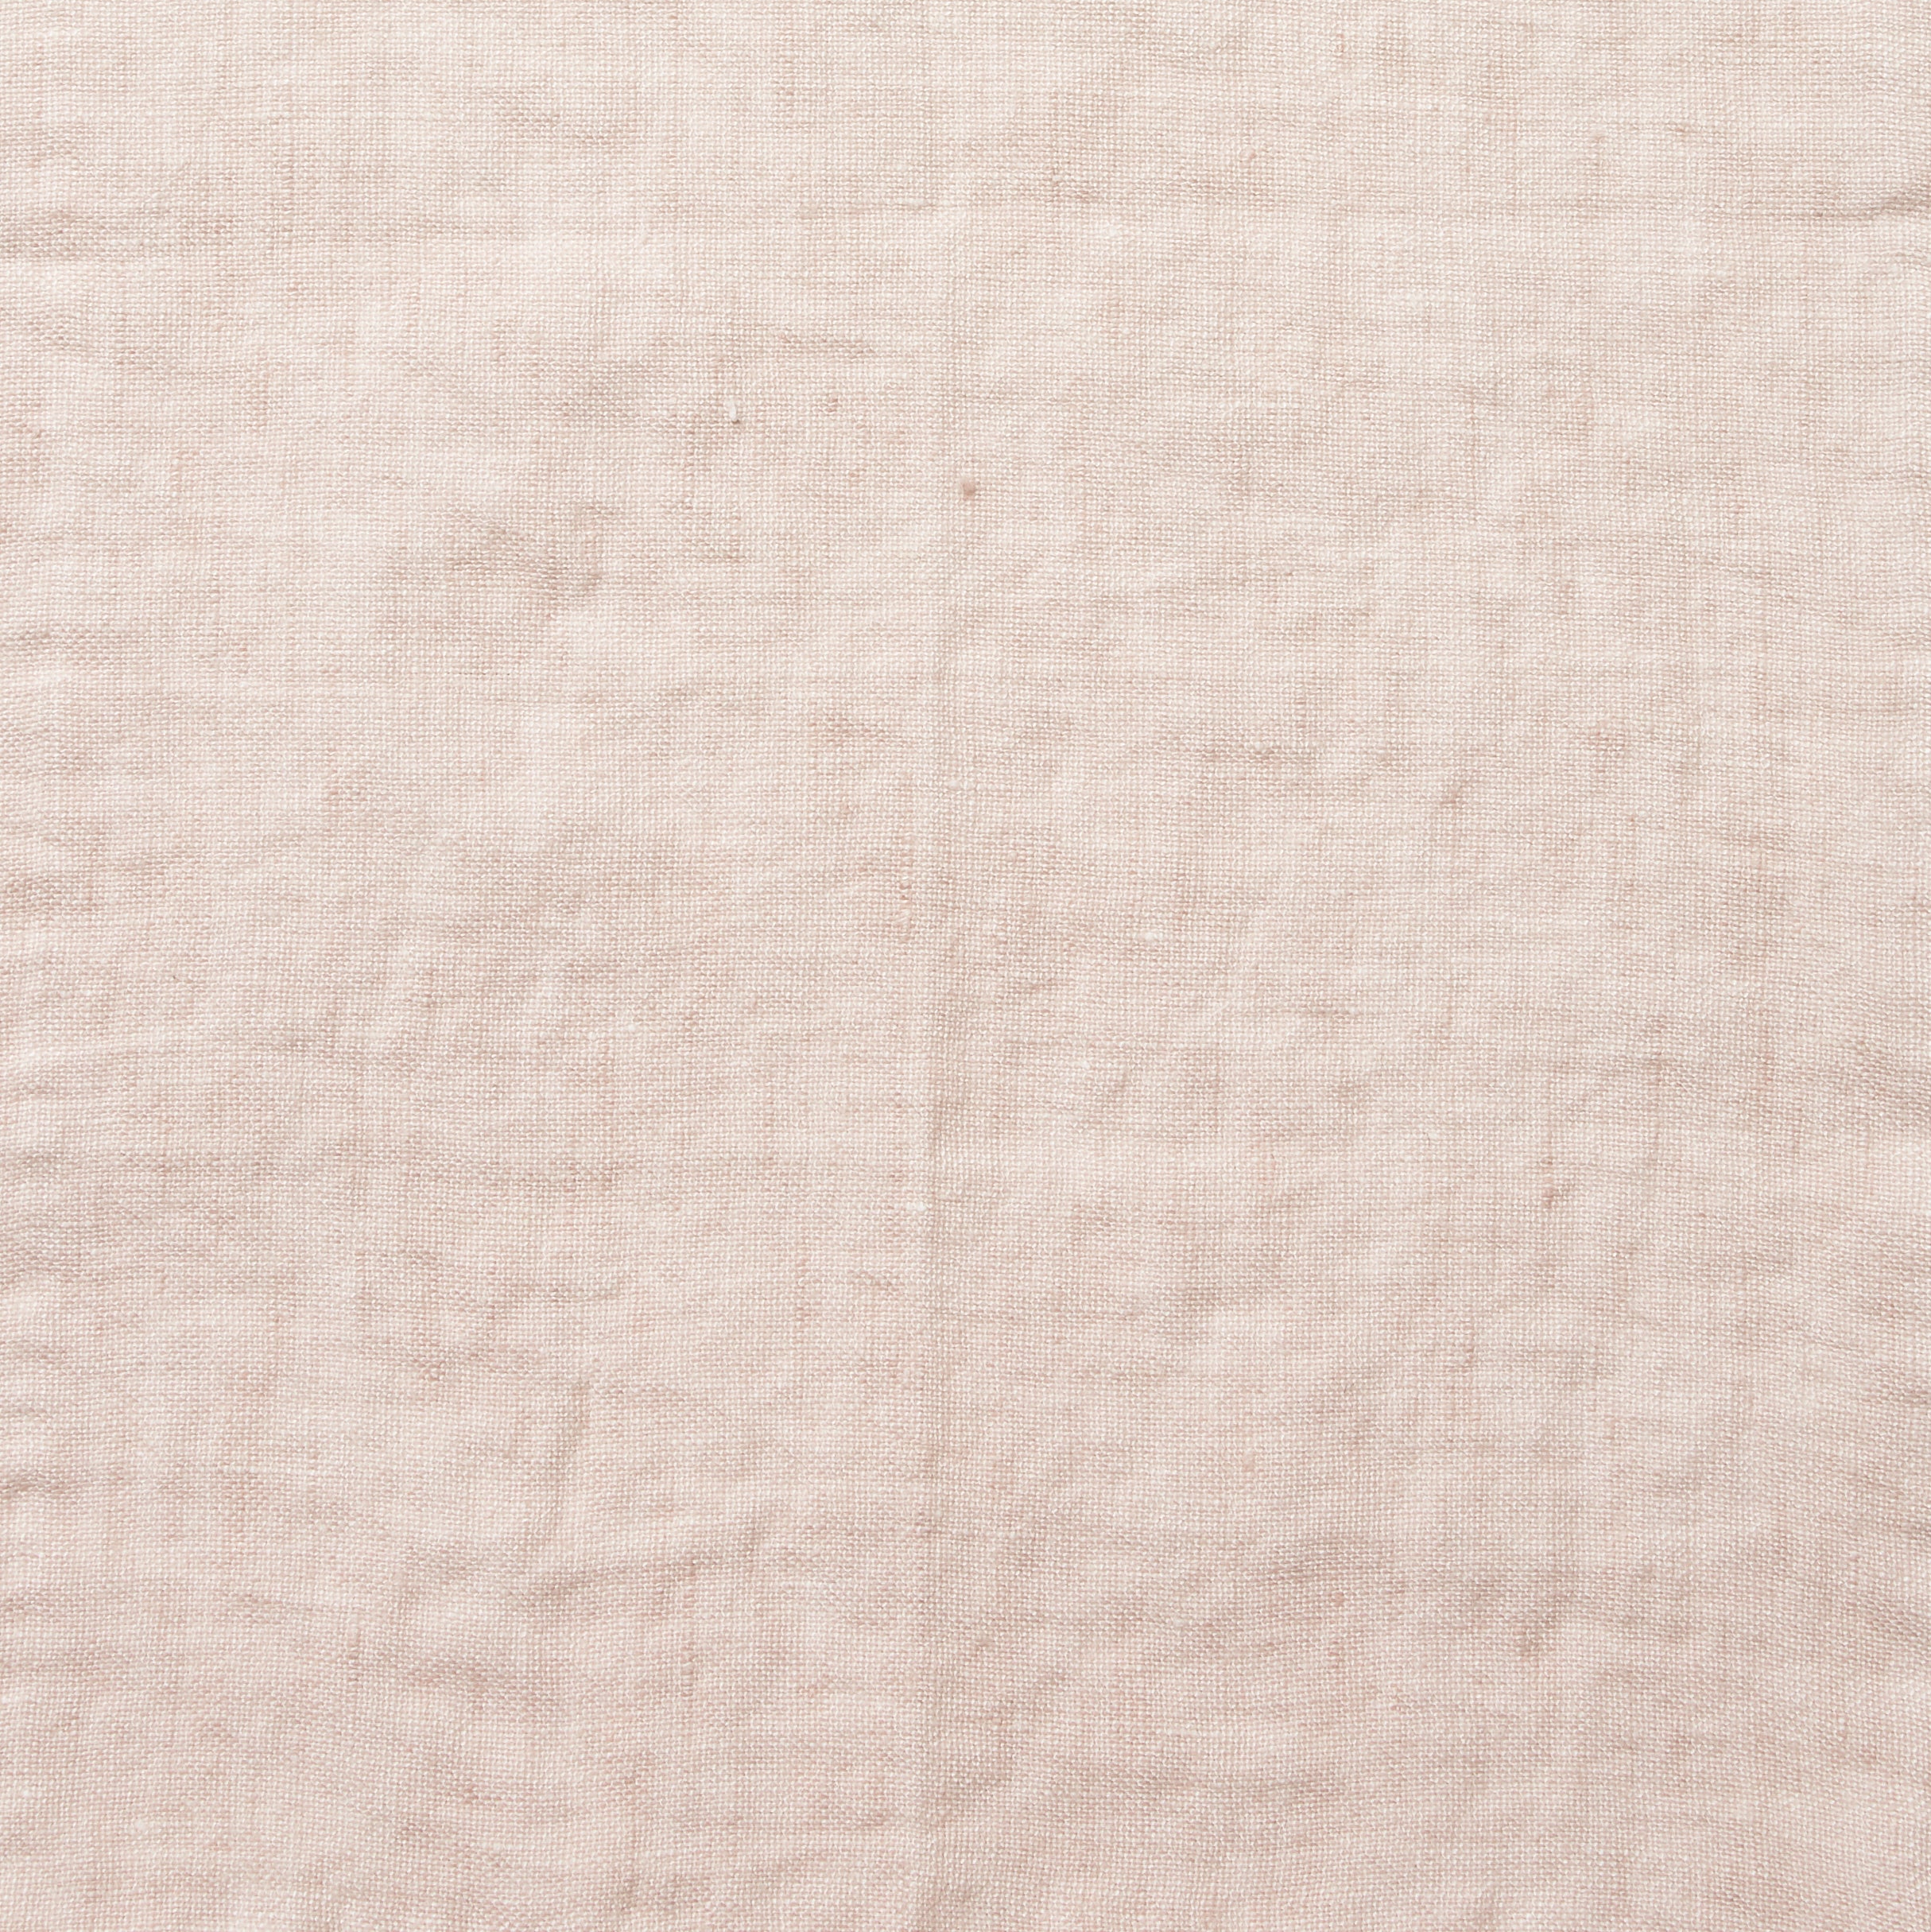 By Mölle linen fabric sample blush